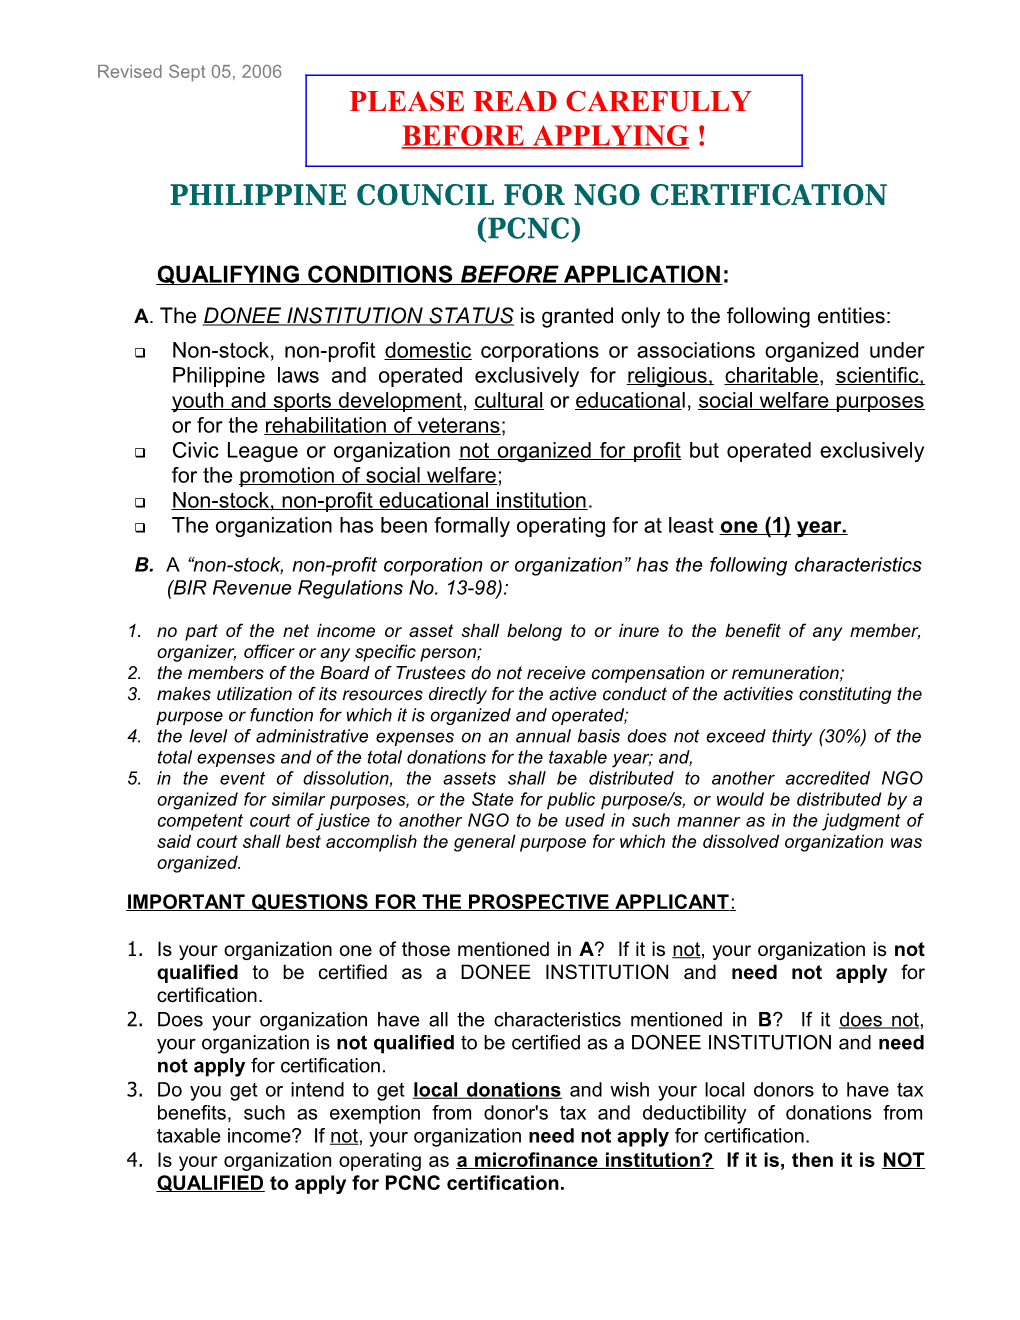 Philippine Council for Ngo Certification (Pcnc)